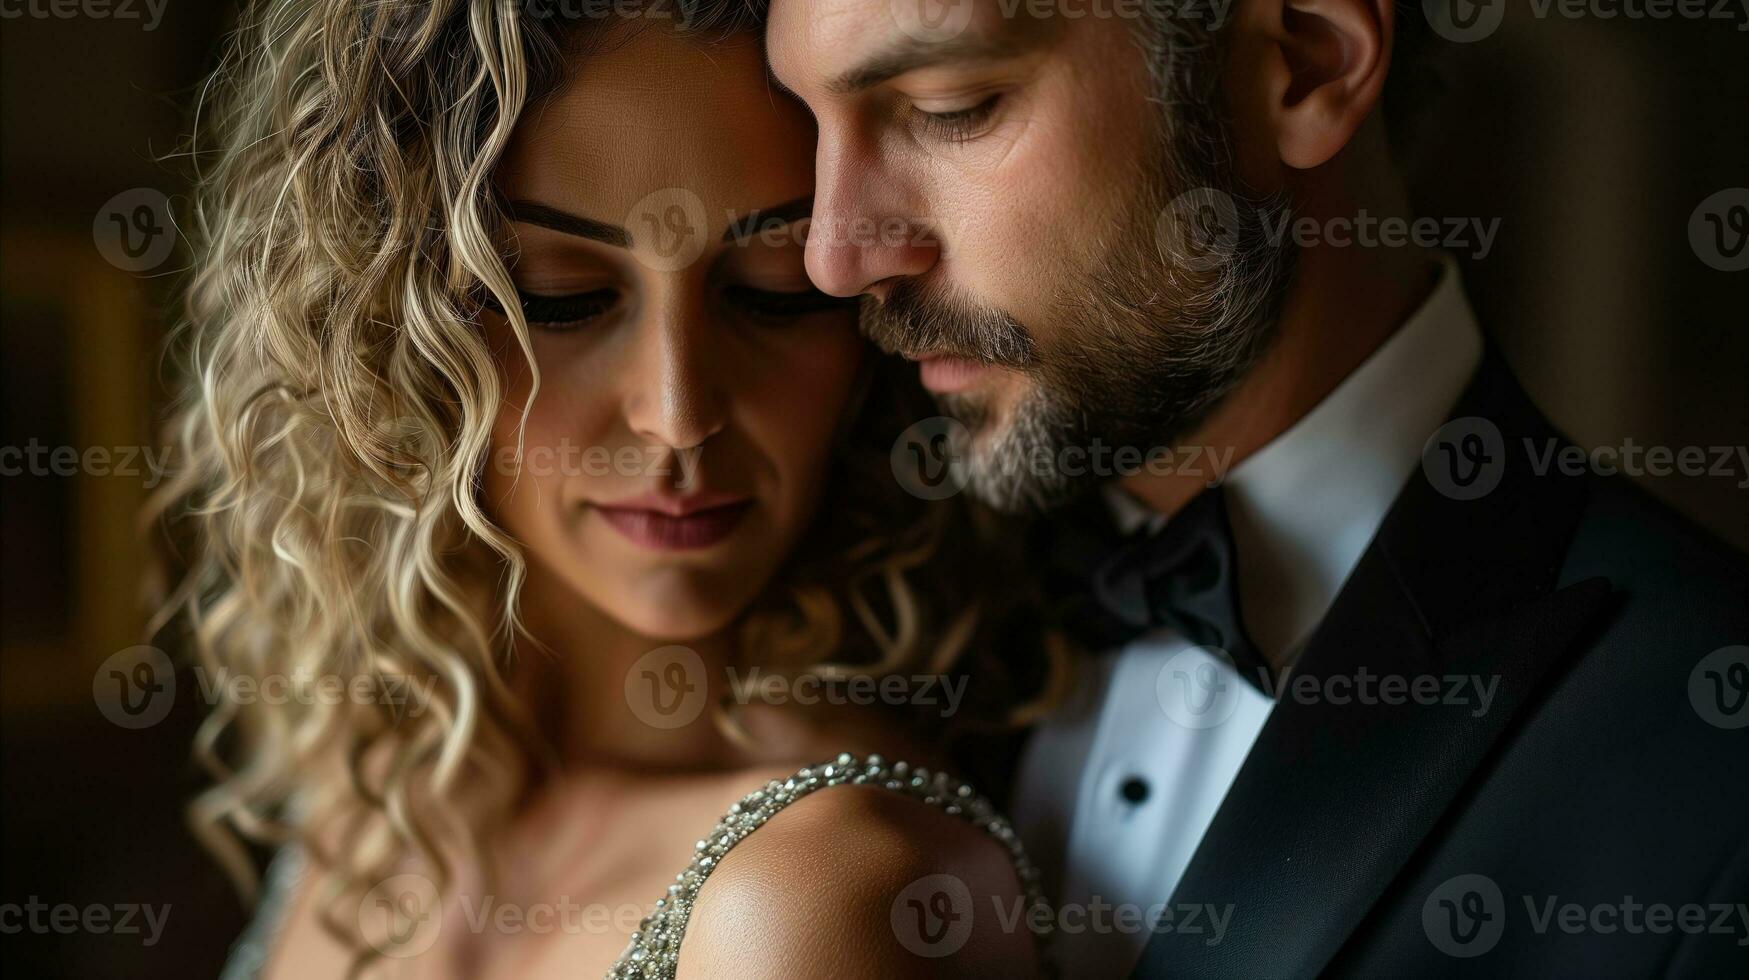 AI generated Elegant couple embracing in a tender moment, intimate evening event photo